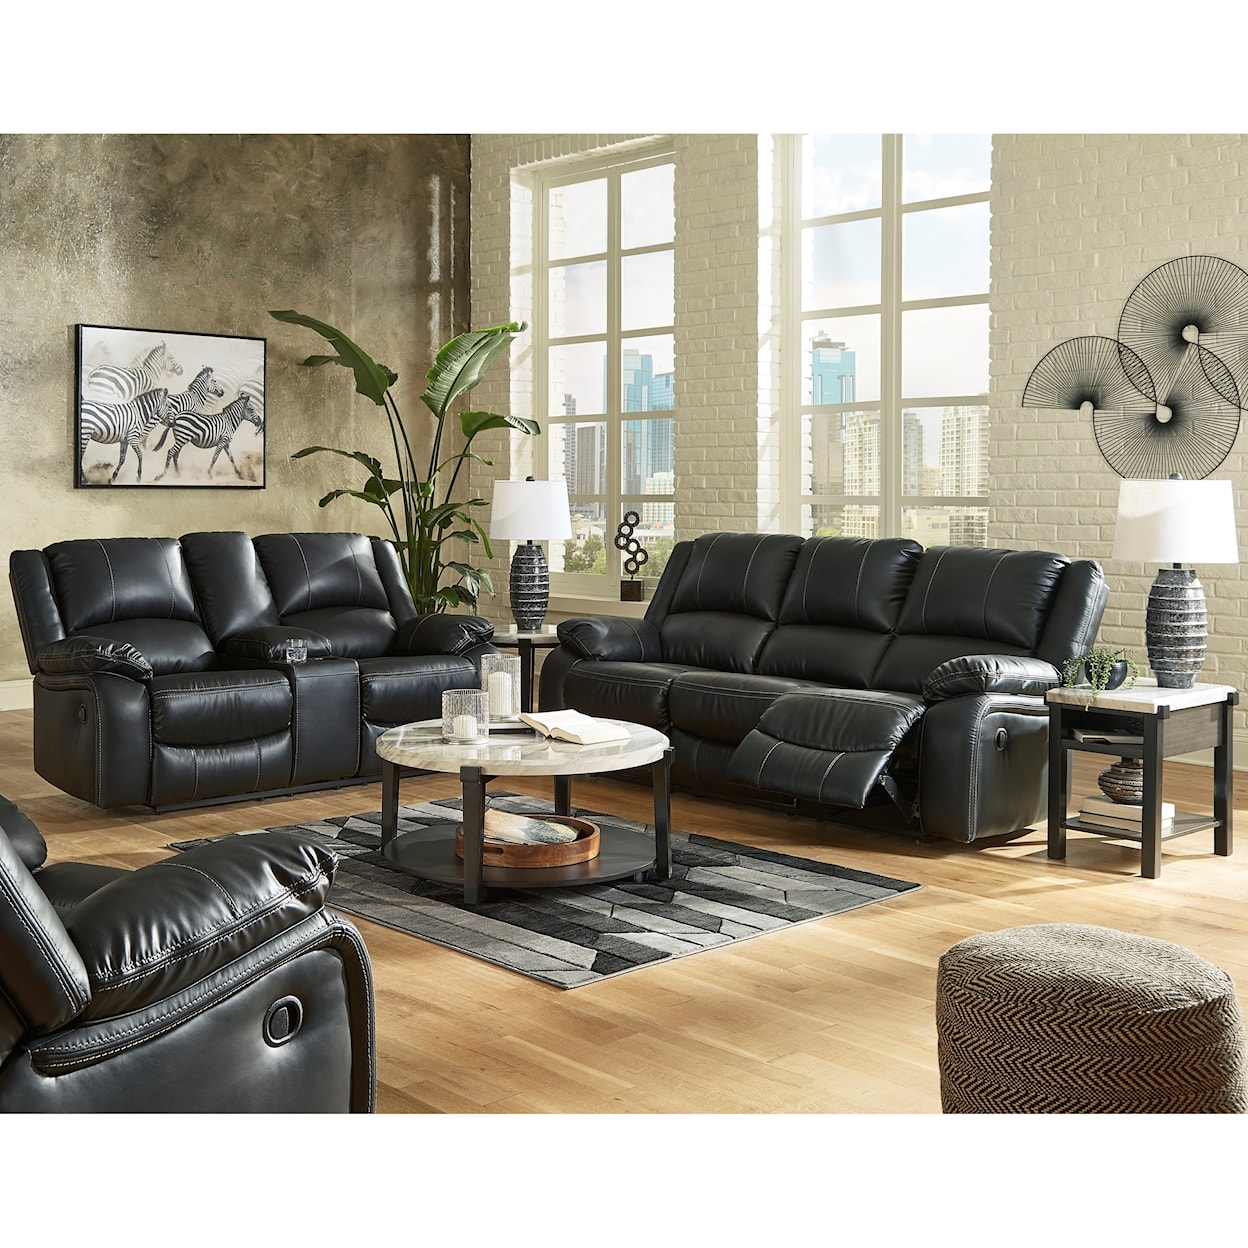 Signature Design by Ashley Furniture Calderwell Power Reclining Living Room Group